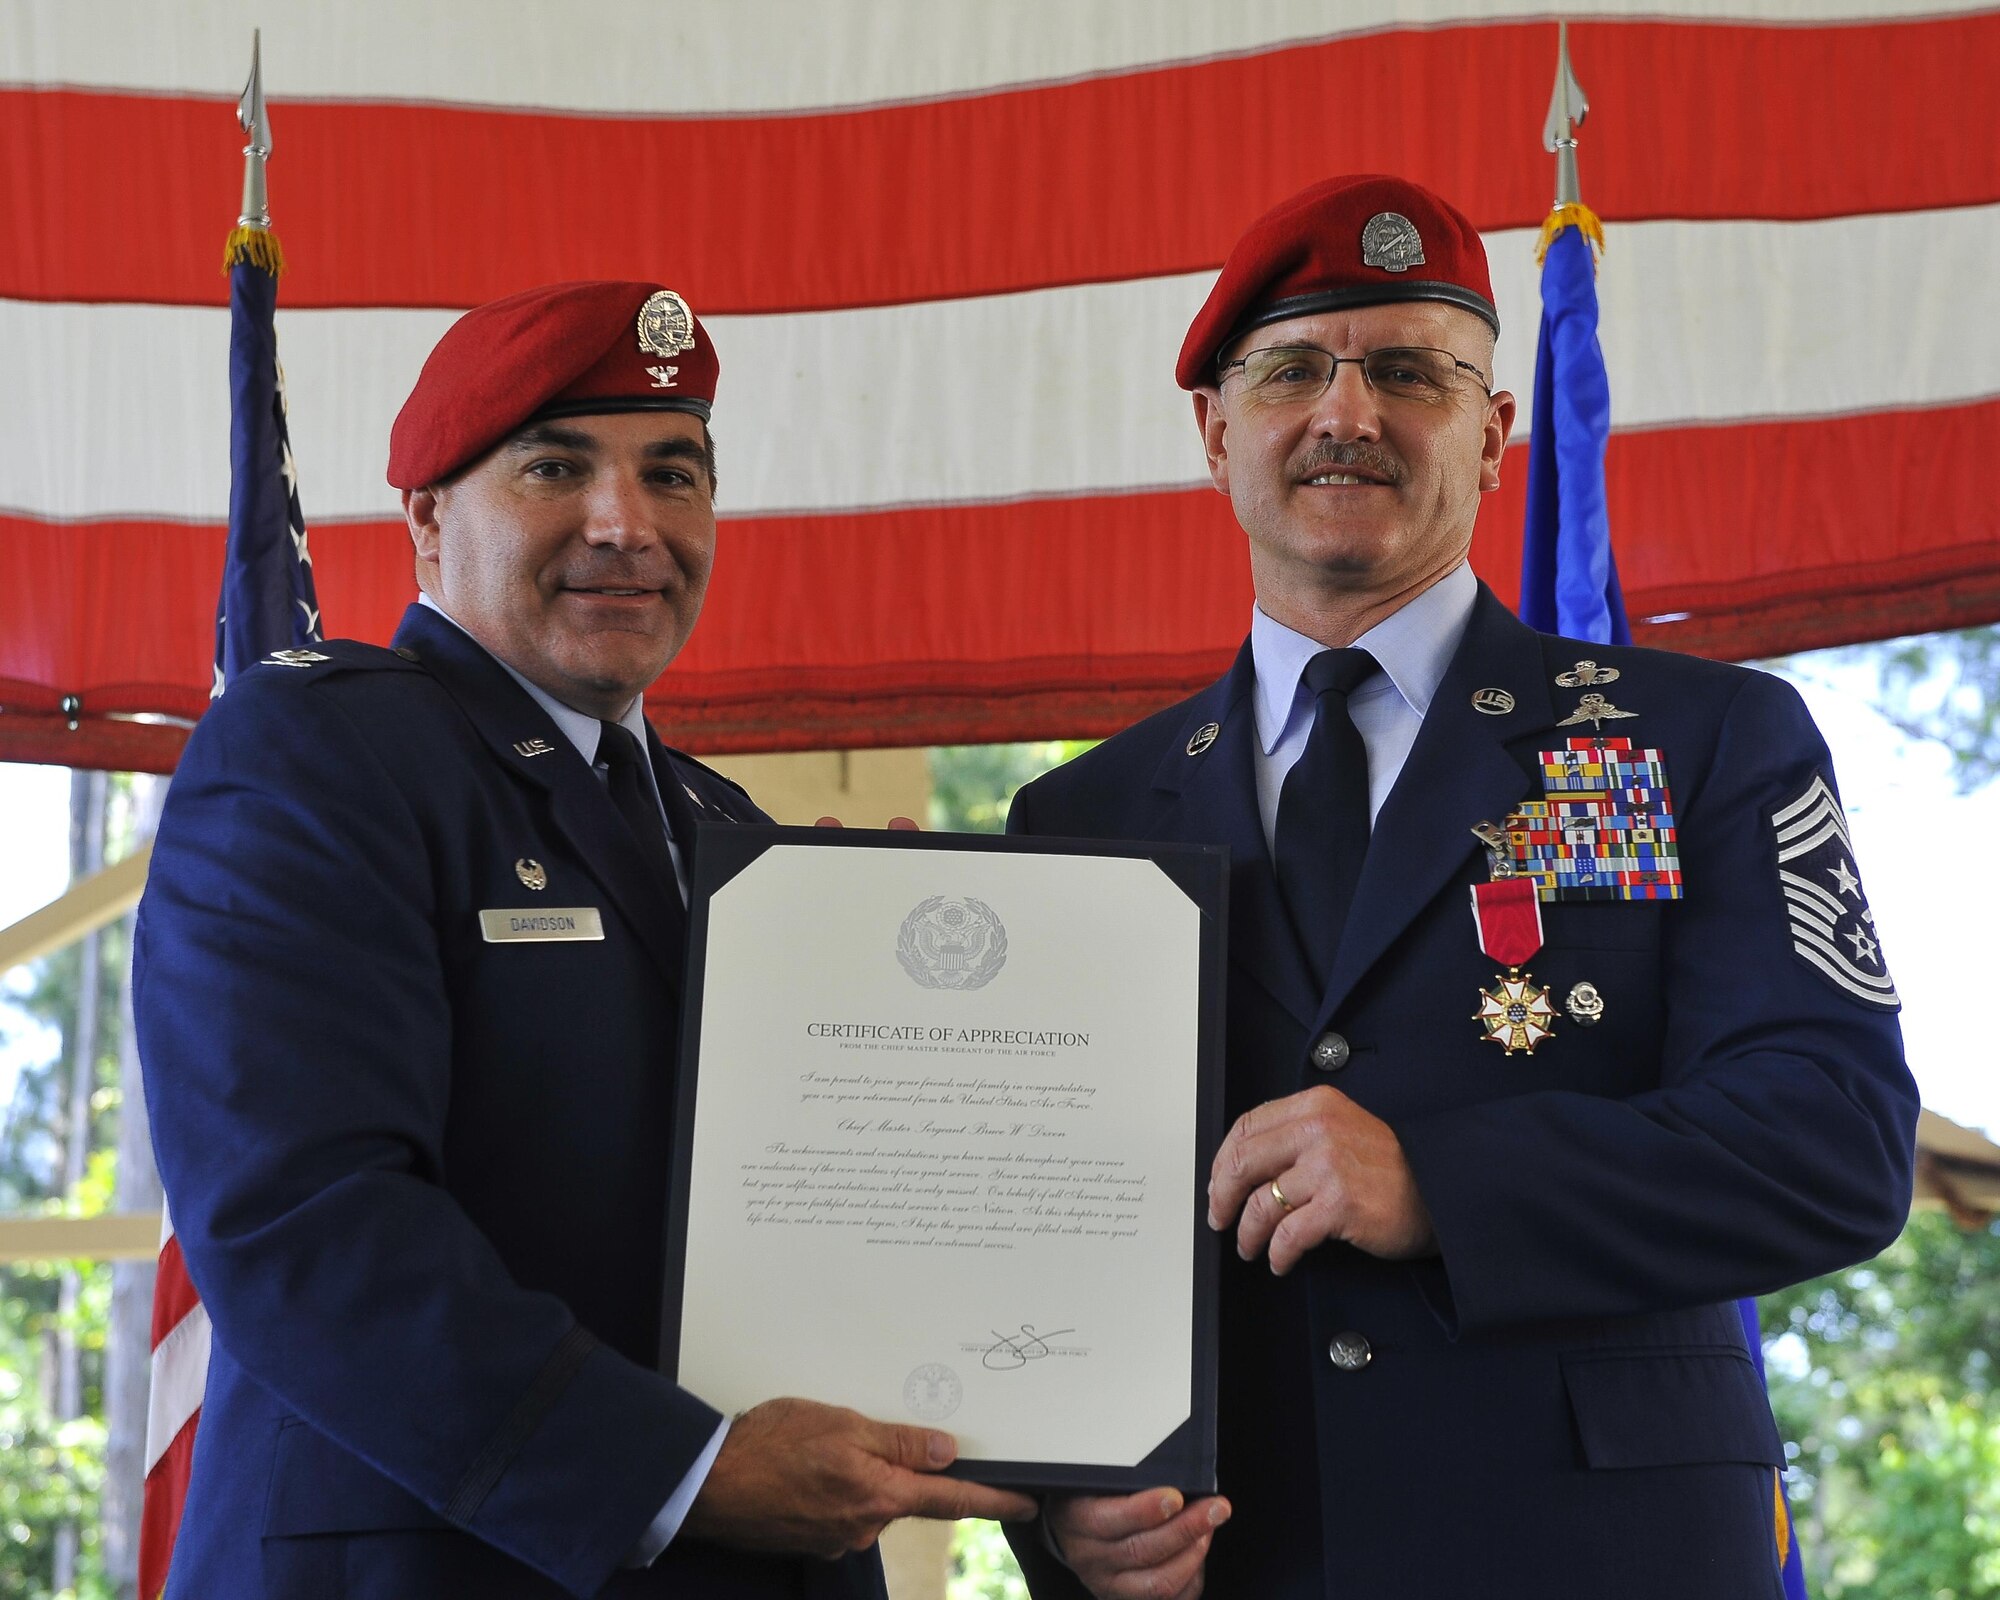 Col. Matthew Davidson, the commander of the 24th Special Operations Wing, presents Chief Master Sgt. Bruce W. Dixon, the command chief of the 24th SOW, with a certificate of retirement during Dixon's retirement ceremony at Hurlburt Field, Fla., May 13, 2016. Dixon served 30 years as a combat controller, earning the title of master parachutist with more than 400 military jumps including three combat jumps in Afghanistan. In total, he spent ten of those thirty years away from his family, consistently serving his nation's call in dangerous ground combat and training. (U.S. Air Force photo by Airman 1st Class Kai White)